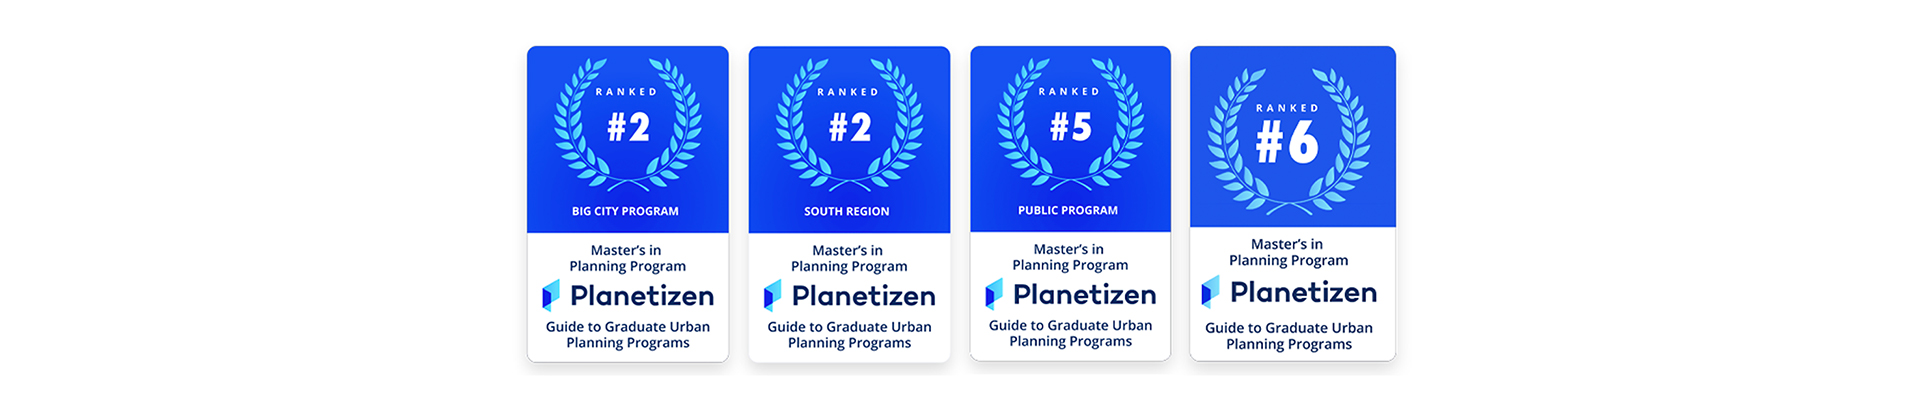 Badges from Planetizen: 2nd in the South, 2nd in Big Cities, 5th Public Program, 6th Overall.